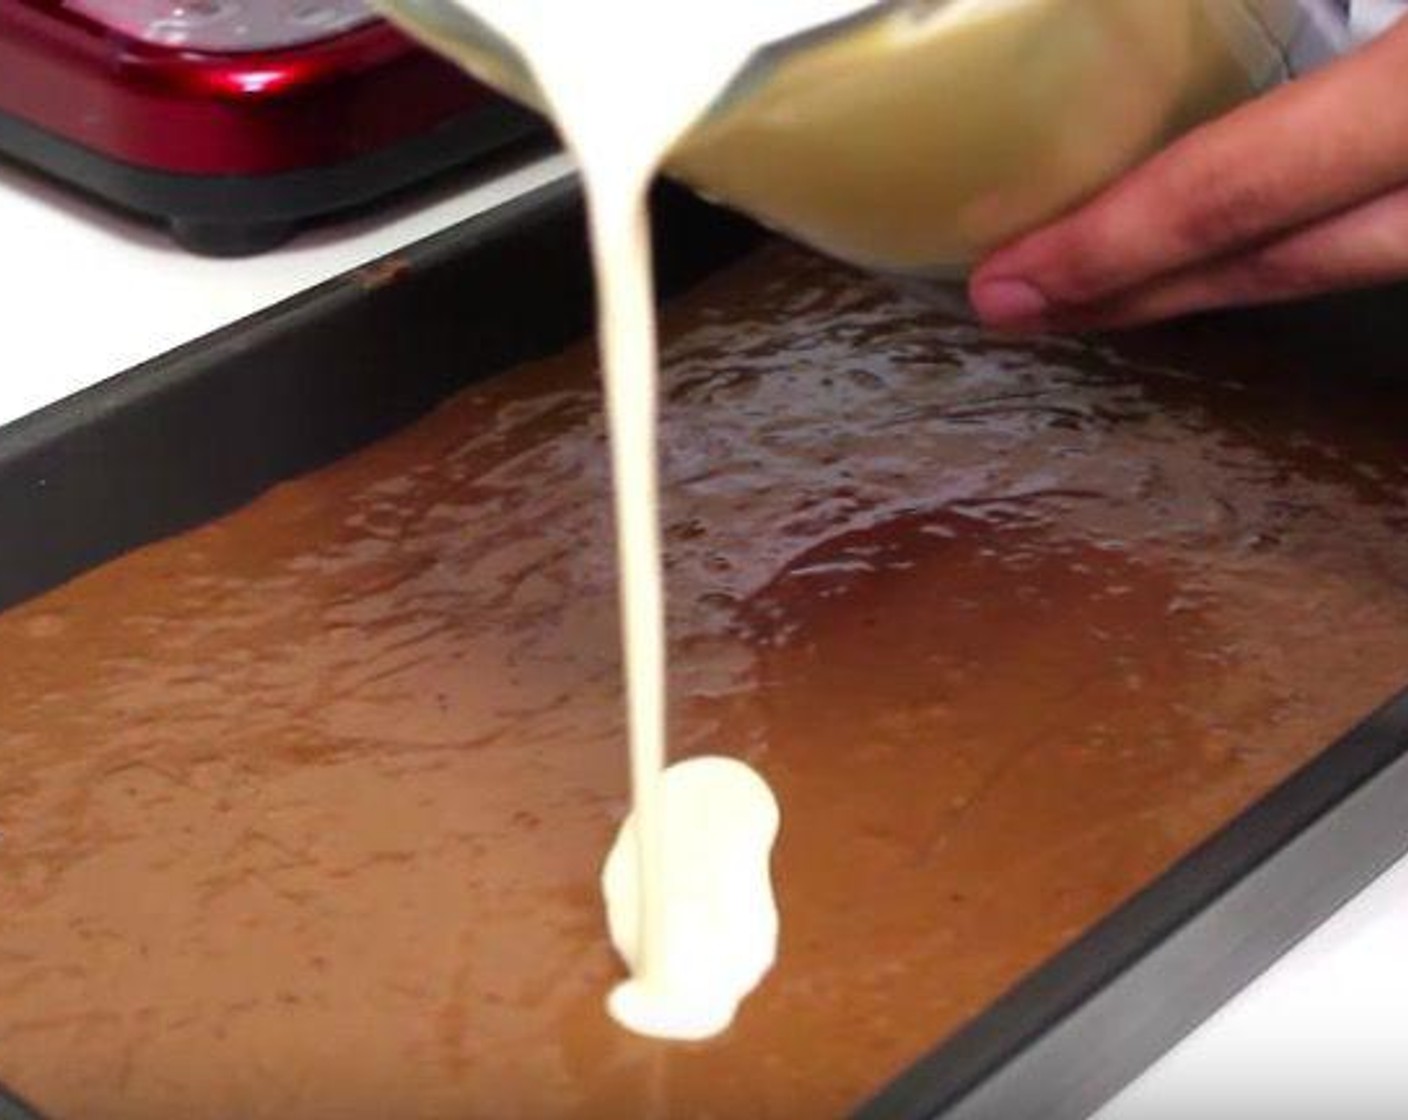 step 3 Pour Eggs (5), Evaporated Milk (12 fl oz), Sweetened Condensed Milk (1 1/3 cups) and Vanilla Extract (1 tsp) into a blender and blend it together. Pour this mixture on top of the batter in the pan. Cover with foil.